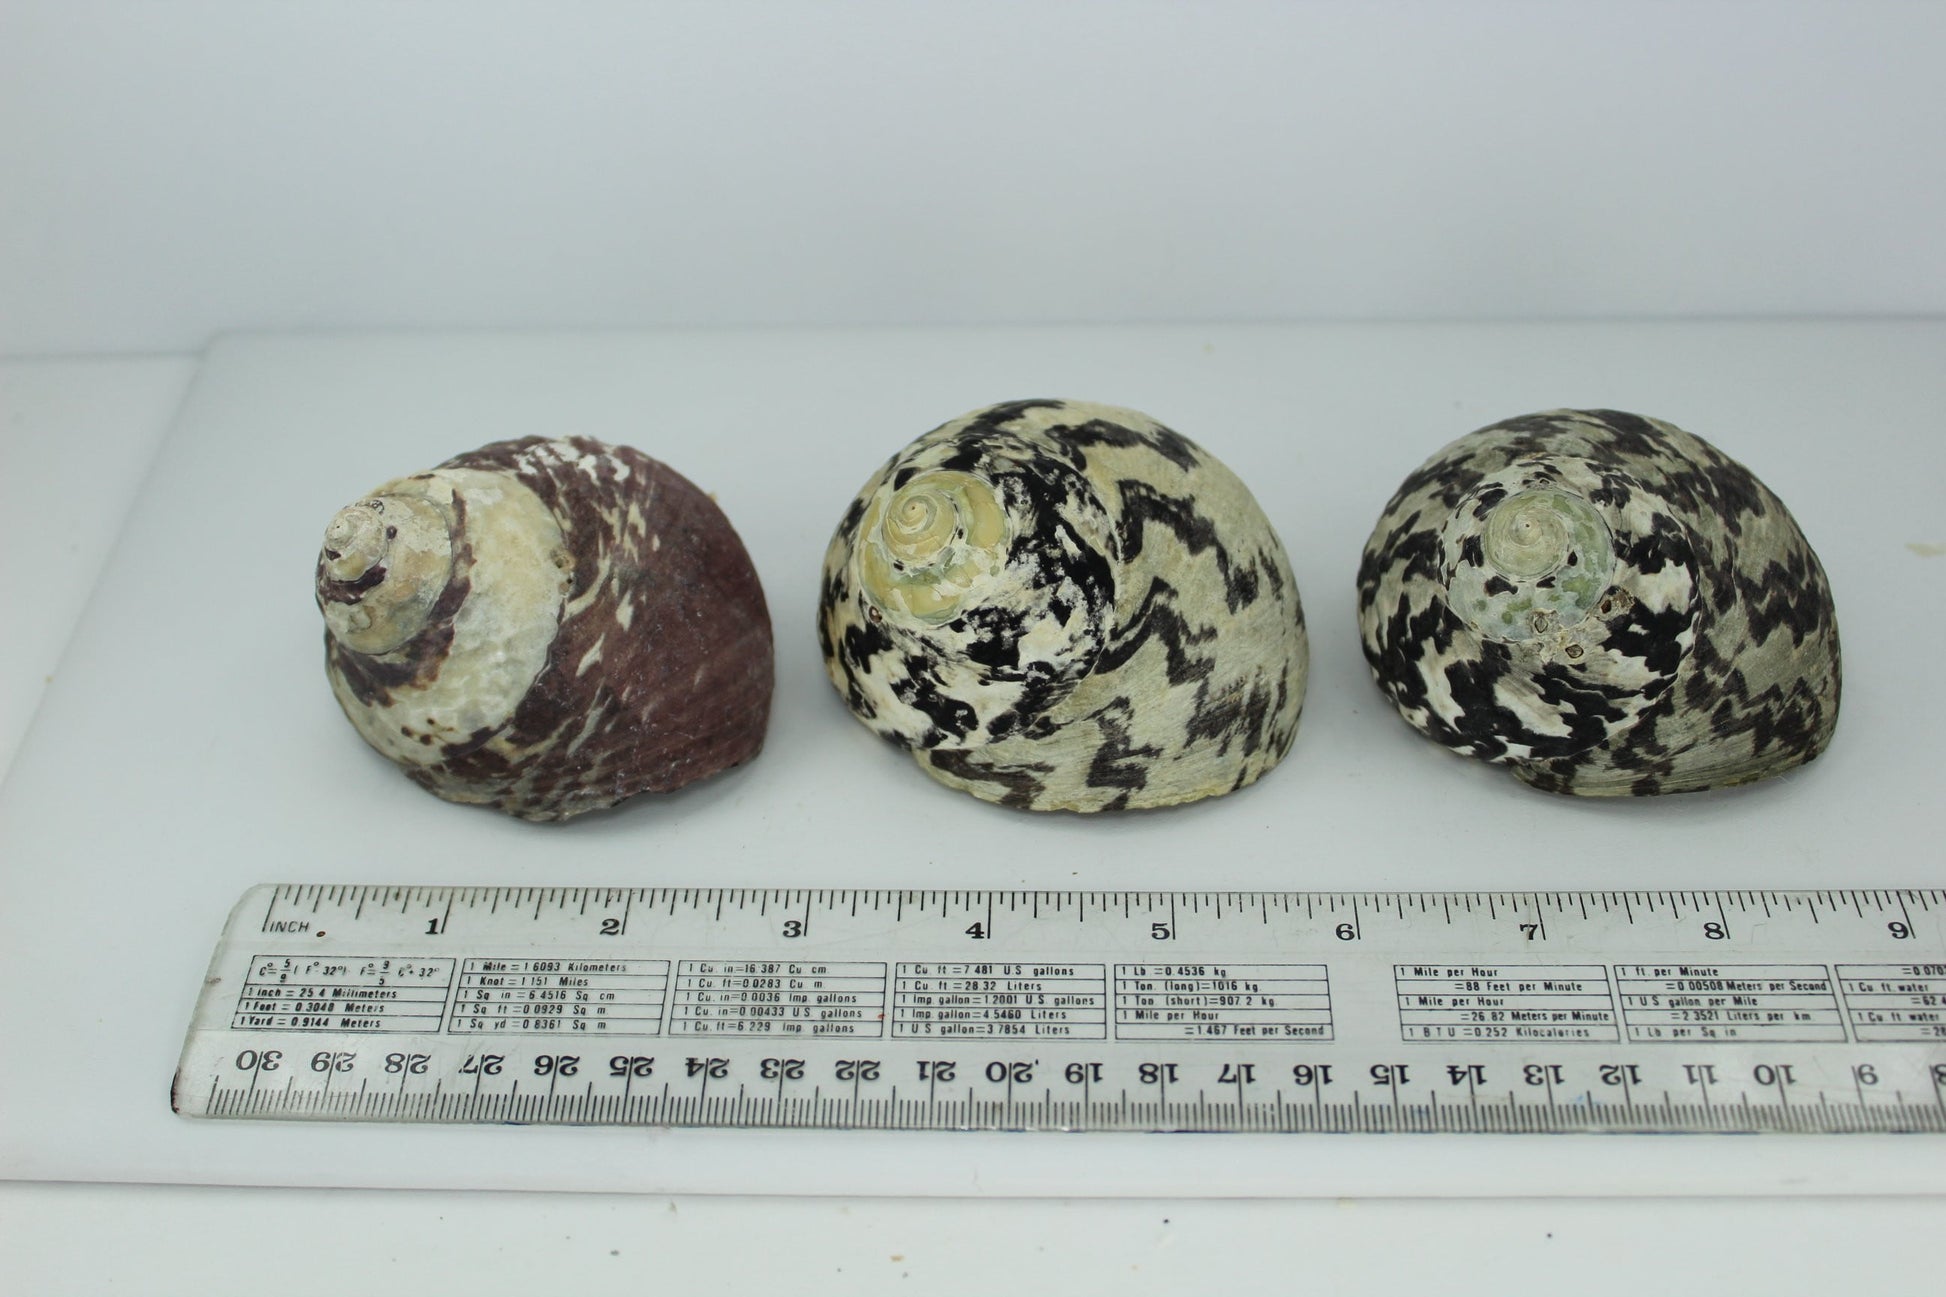 Florida 3 Vintage Turbo Magpie Natural Shells 3"  2 3/4" Operculums Estate Collection Shell Art Collectibles  large